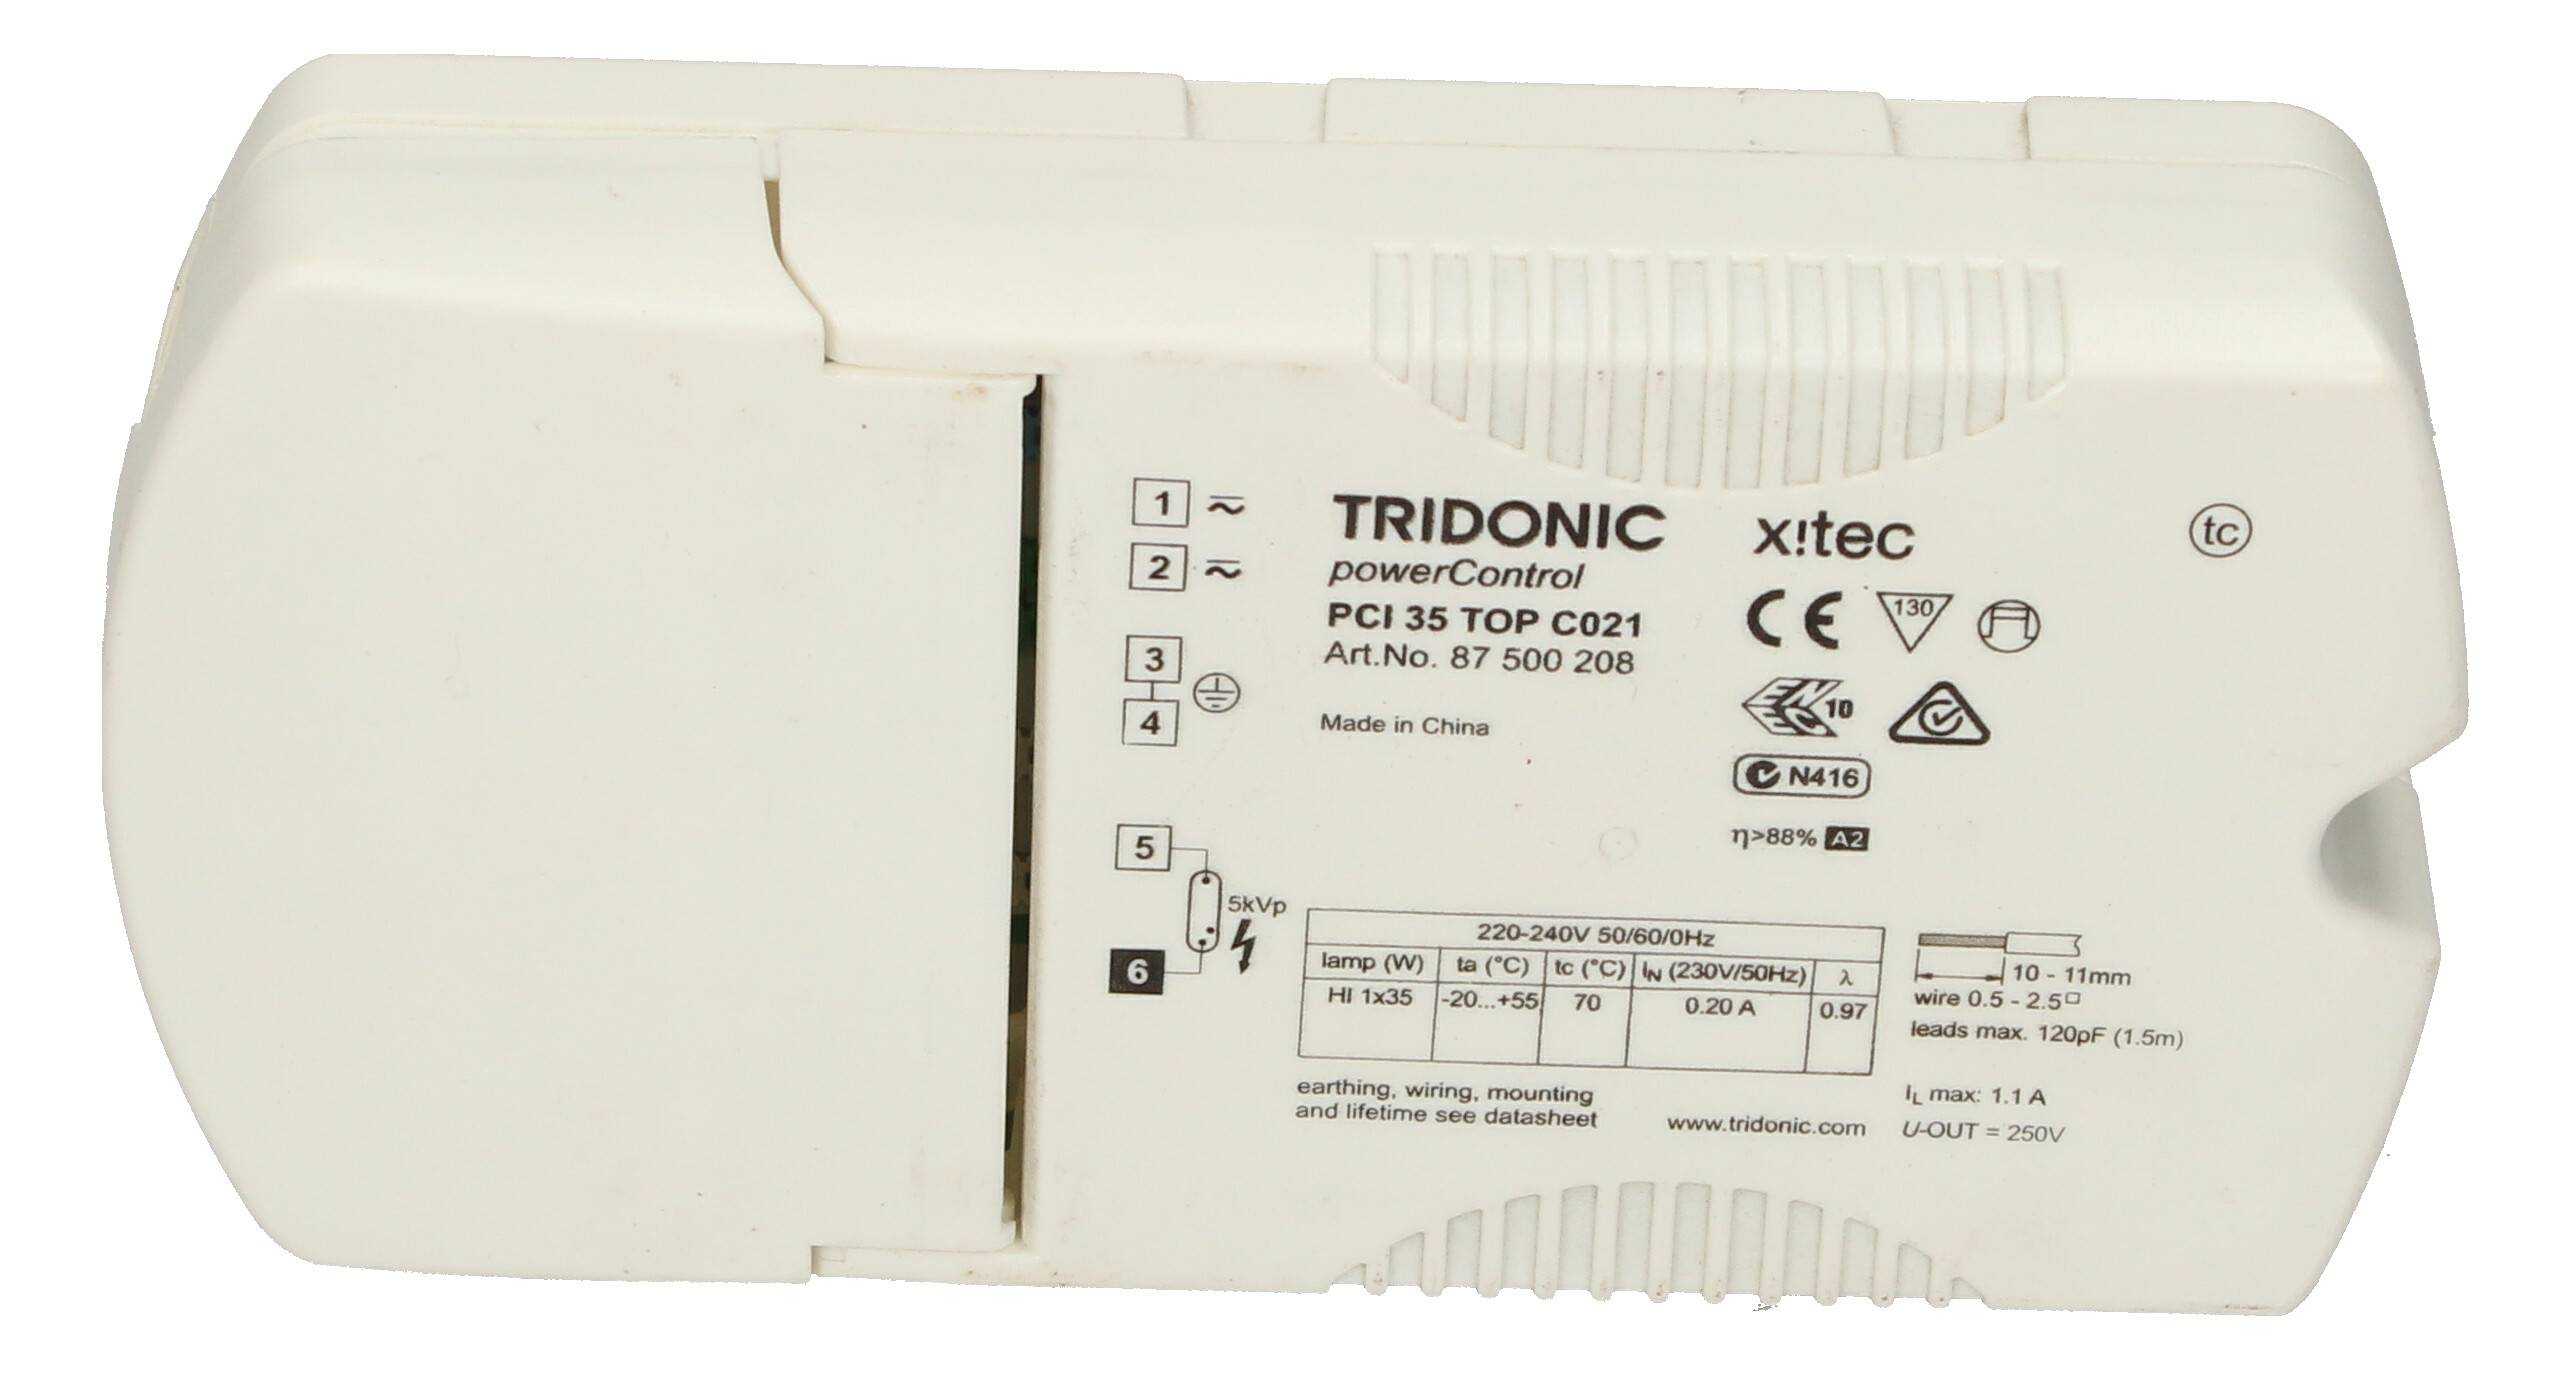 TRIDONIC 86459010 PCI0035-TOP-C021 Computer Download - Image 1